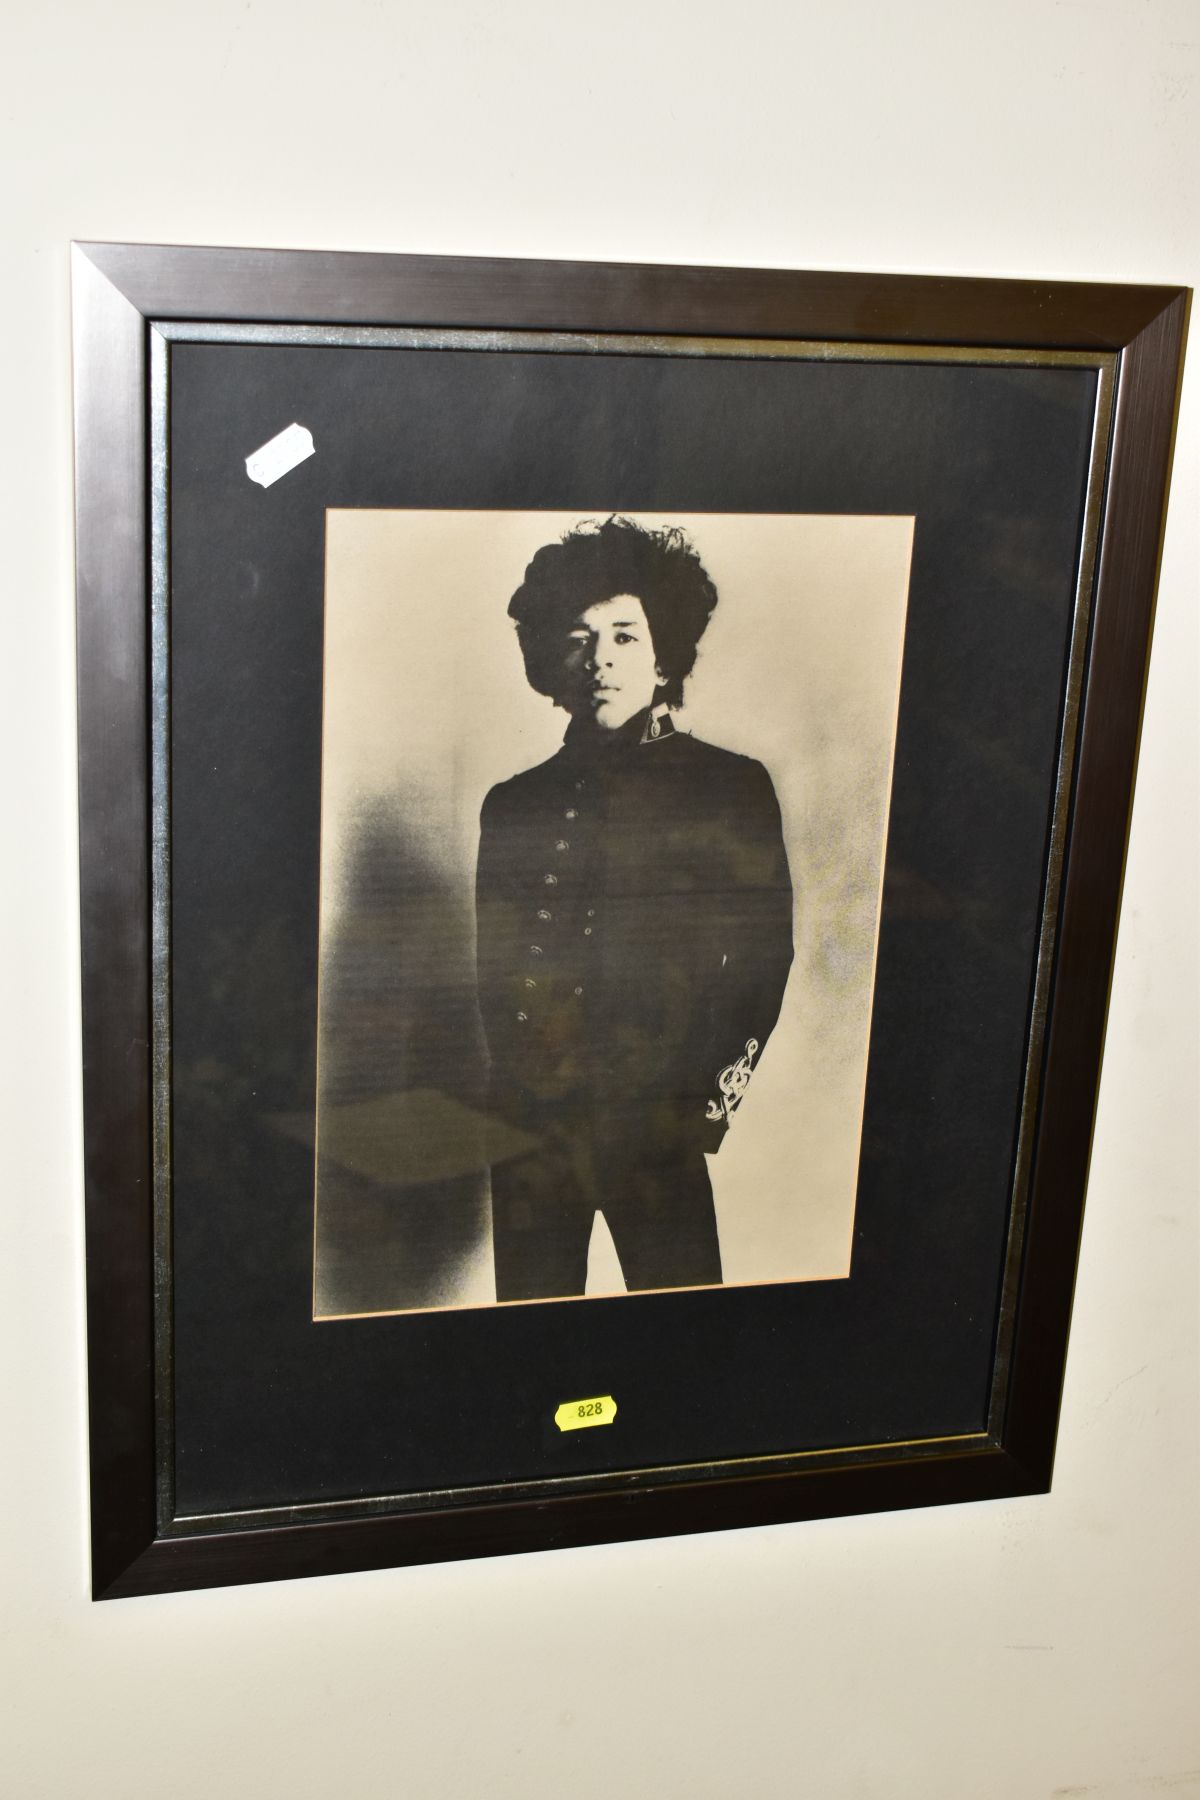 JIMI HENDRIX, three Jimi Hendrix images, a Val Wilmer photo-lithograph limited edition 68/500 of - Image 4 of 5